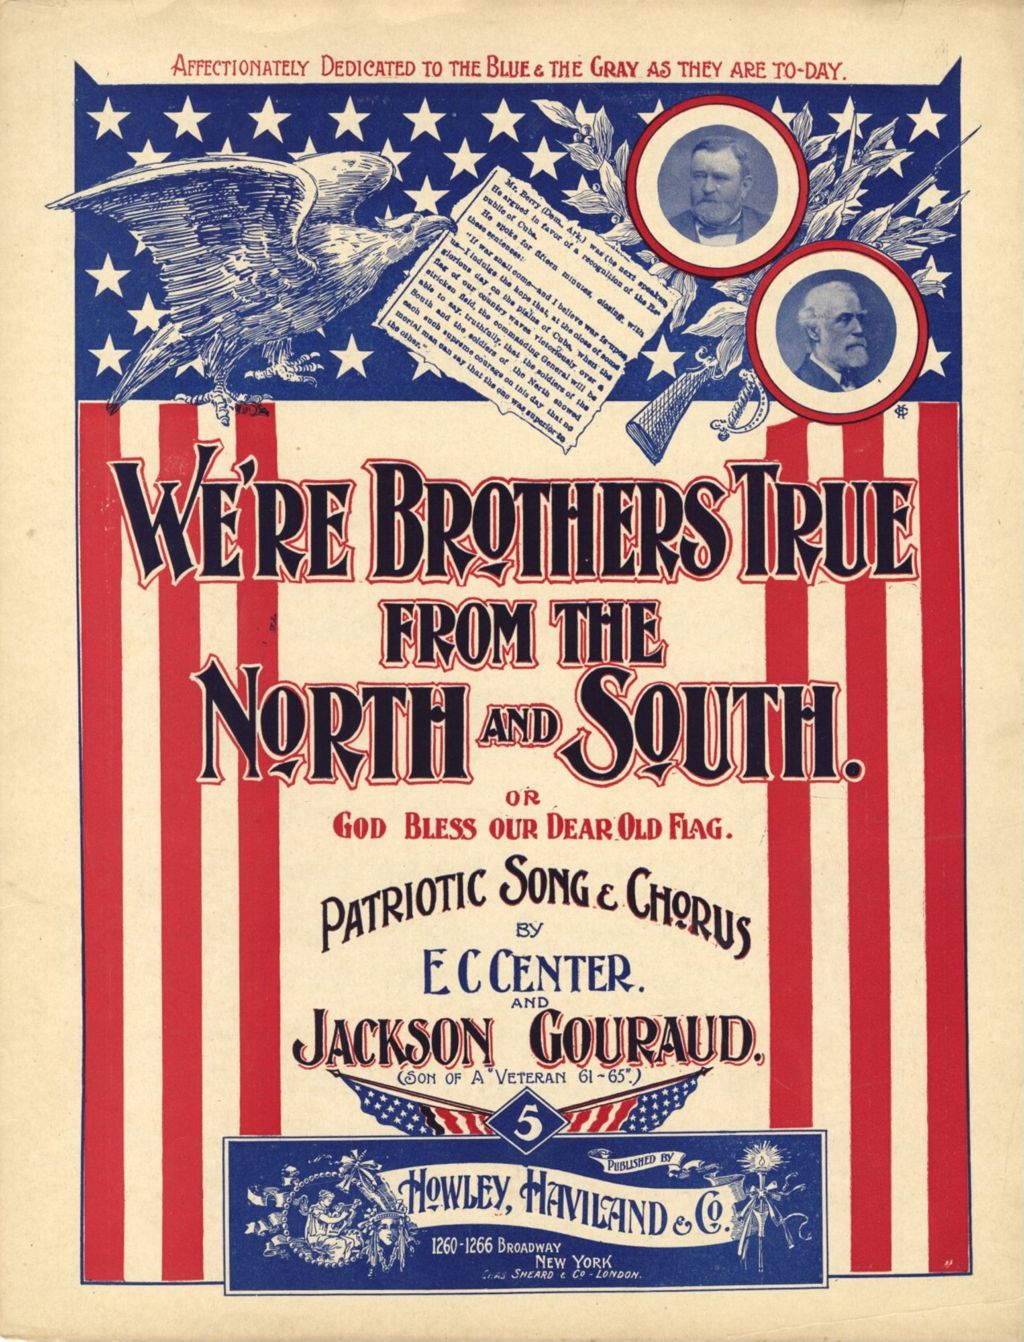 We're Brothers True from the North and South (God Bless Our Dear Old Flag)